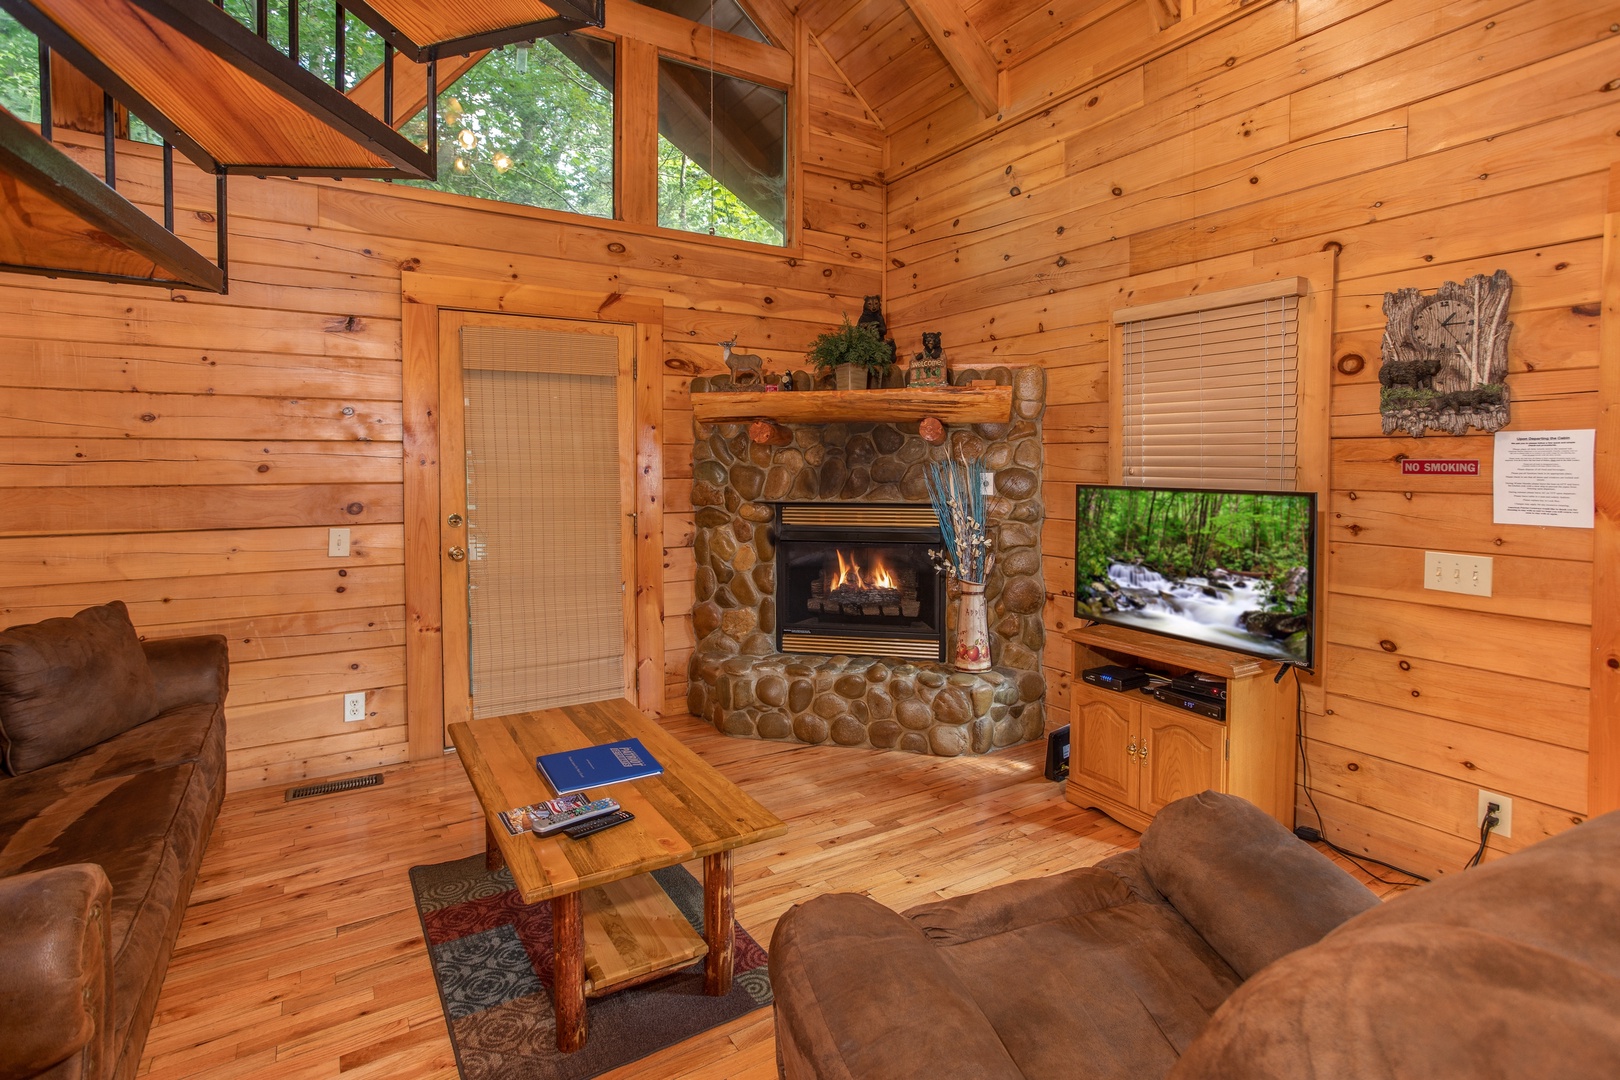 Living room with a fireplace, television, and vaulted ceiling at Dreams Do Come True, a 1-bedroom cabin rental located in Pigeon Forge